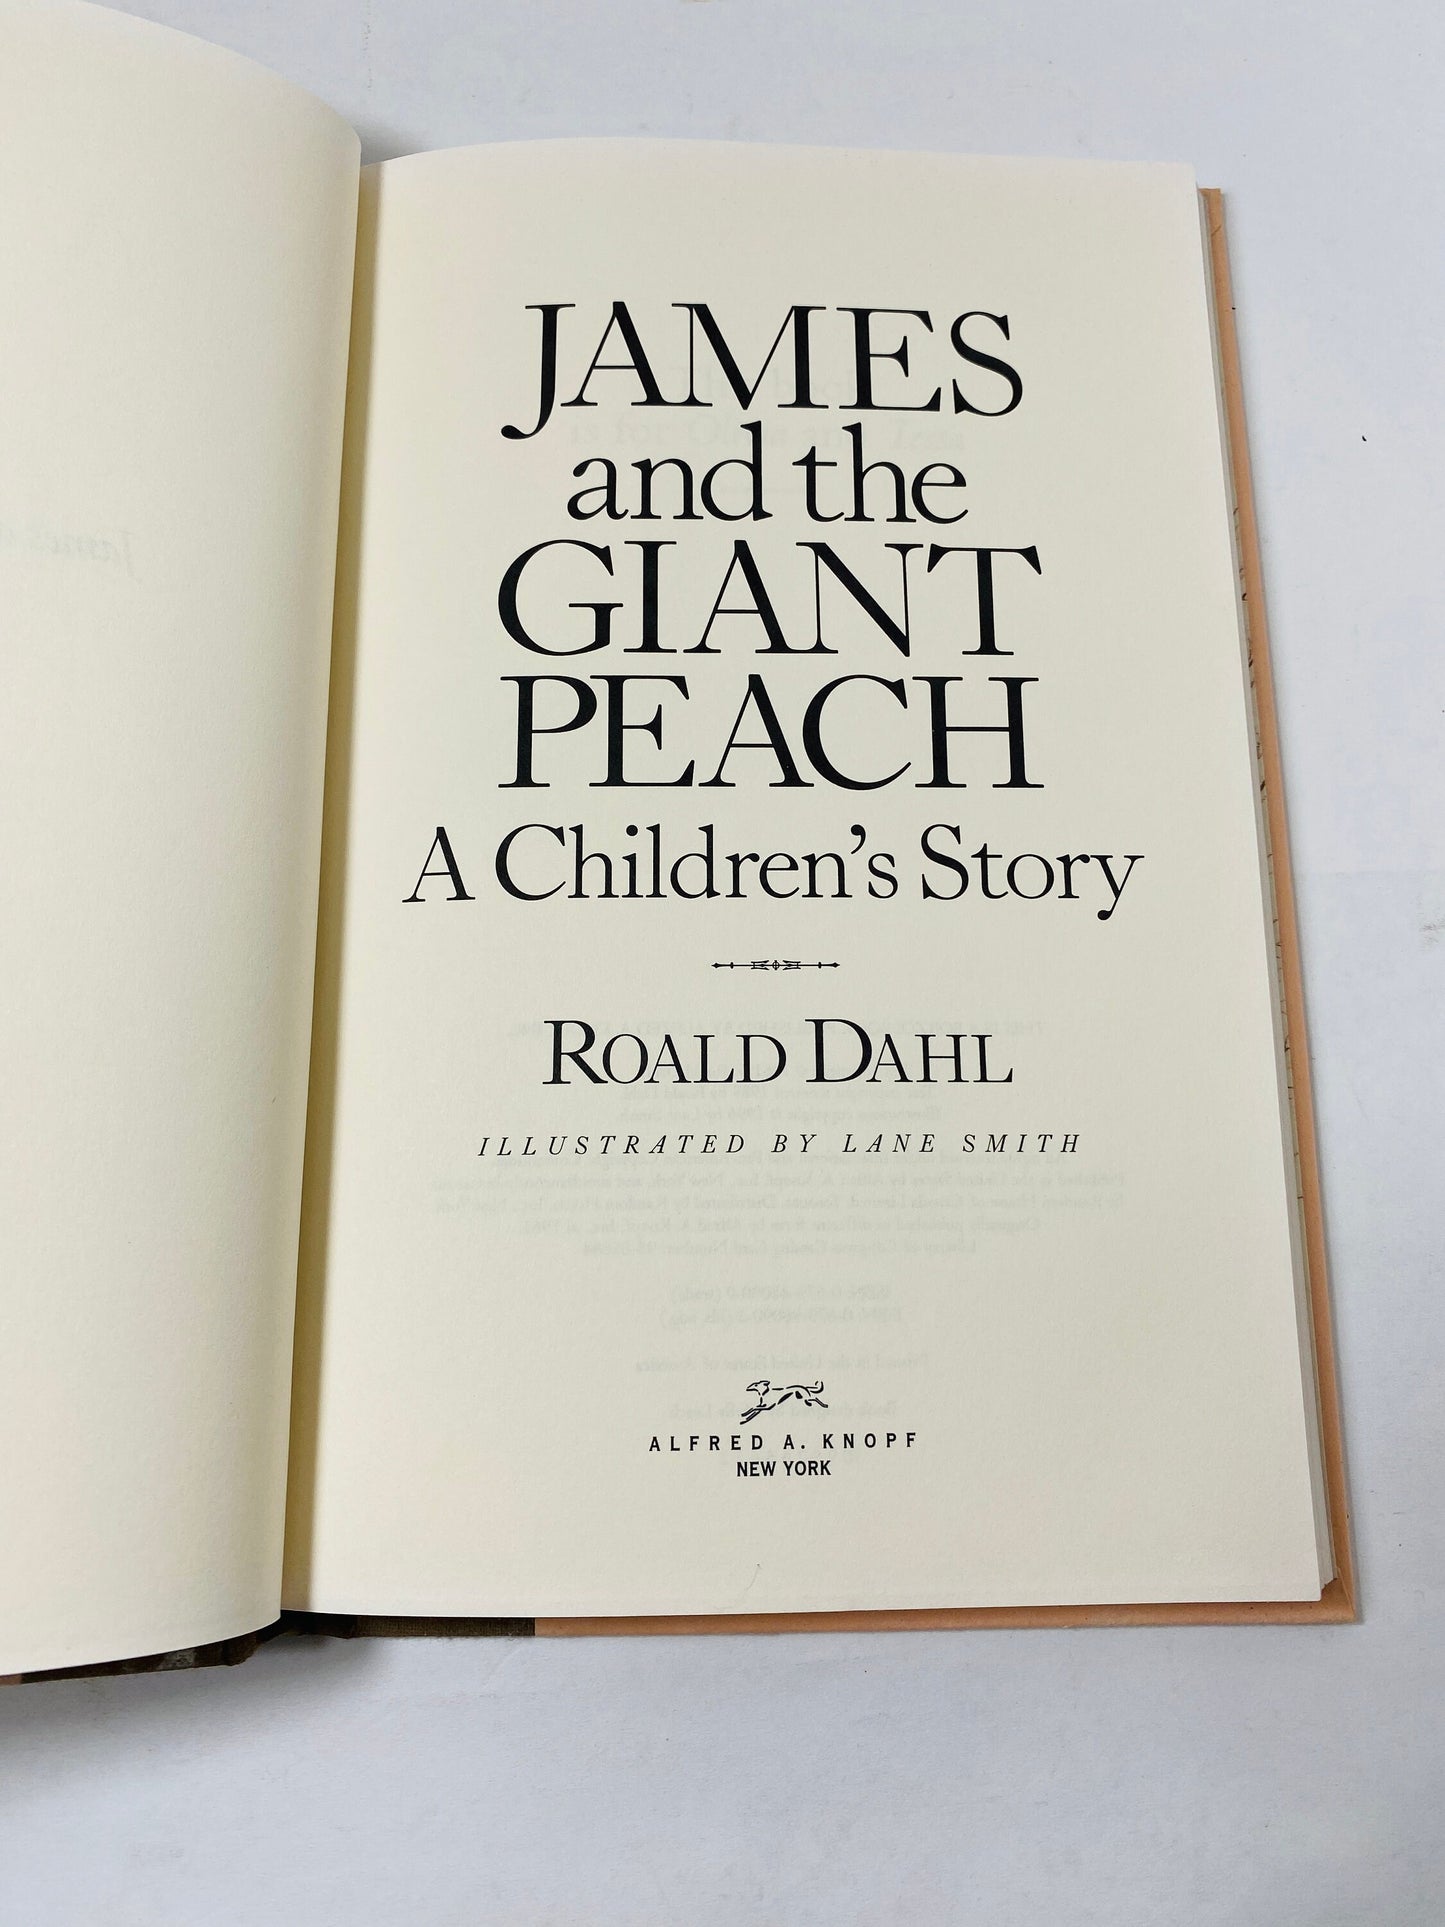 James and the Giant Peach by Roald Dahl vintage book pink gift Collector unique shelf decor by author of Charlie and the Chocolate Factory